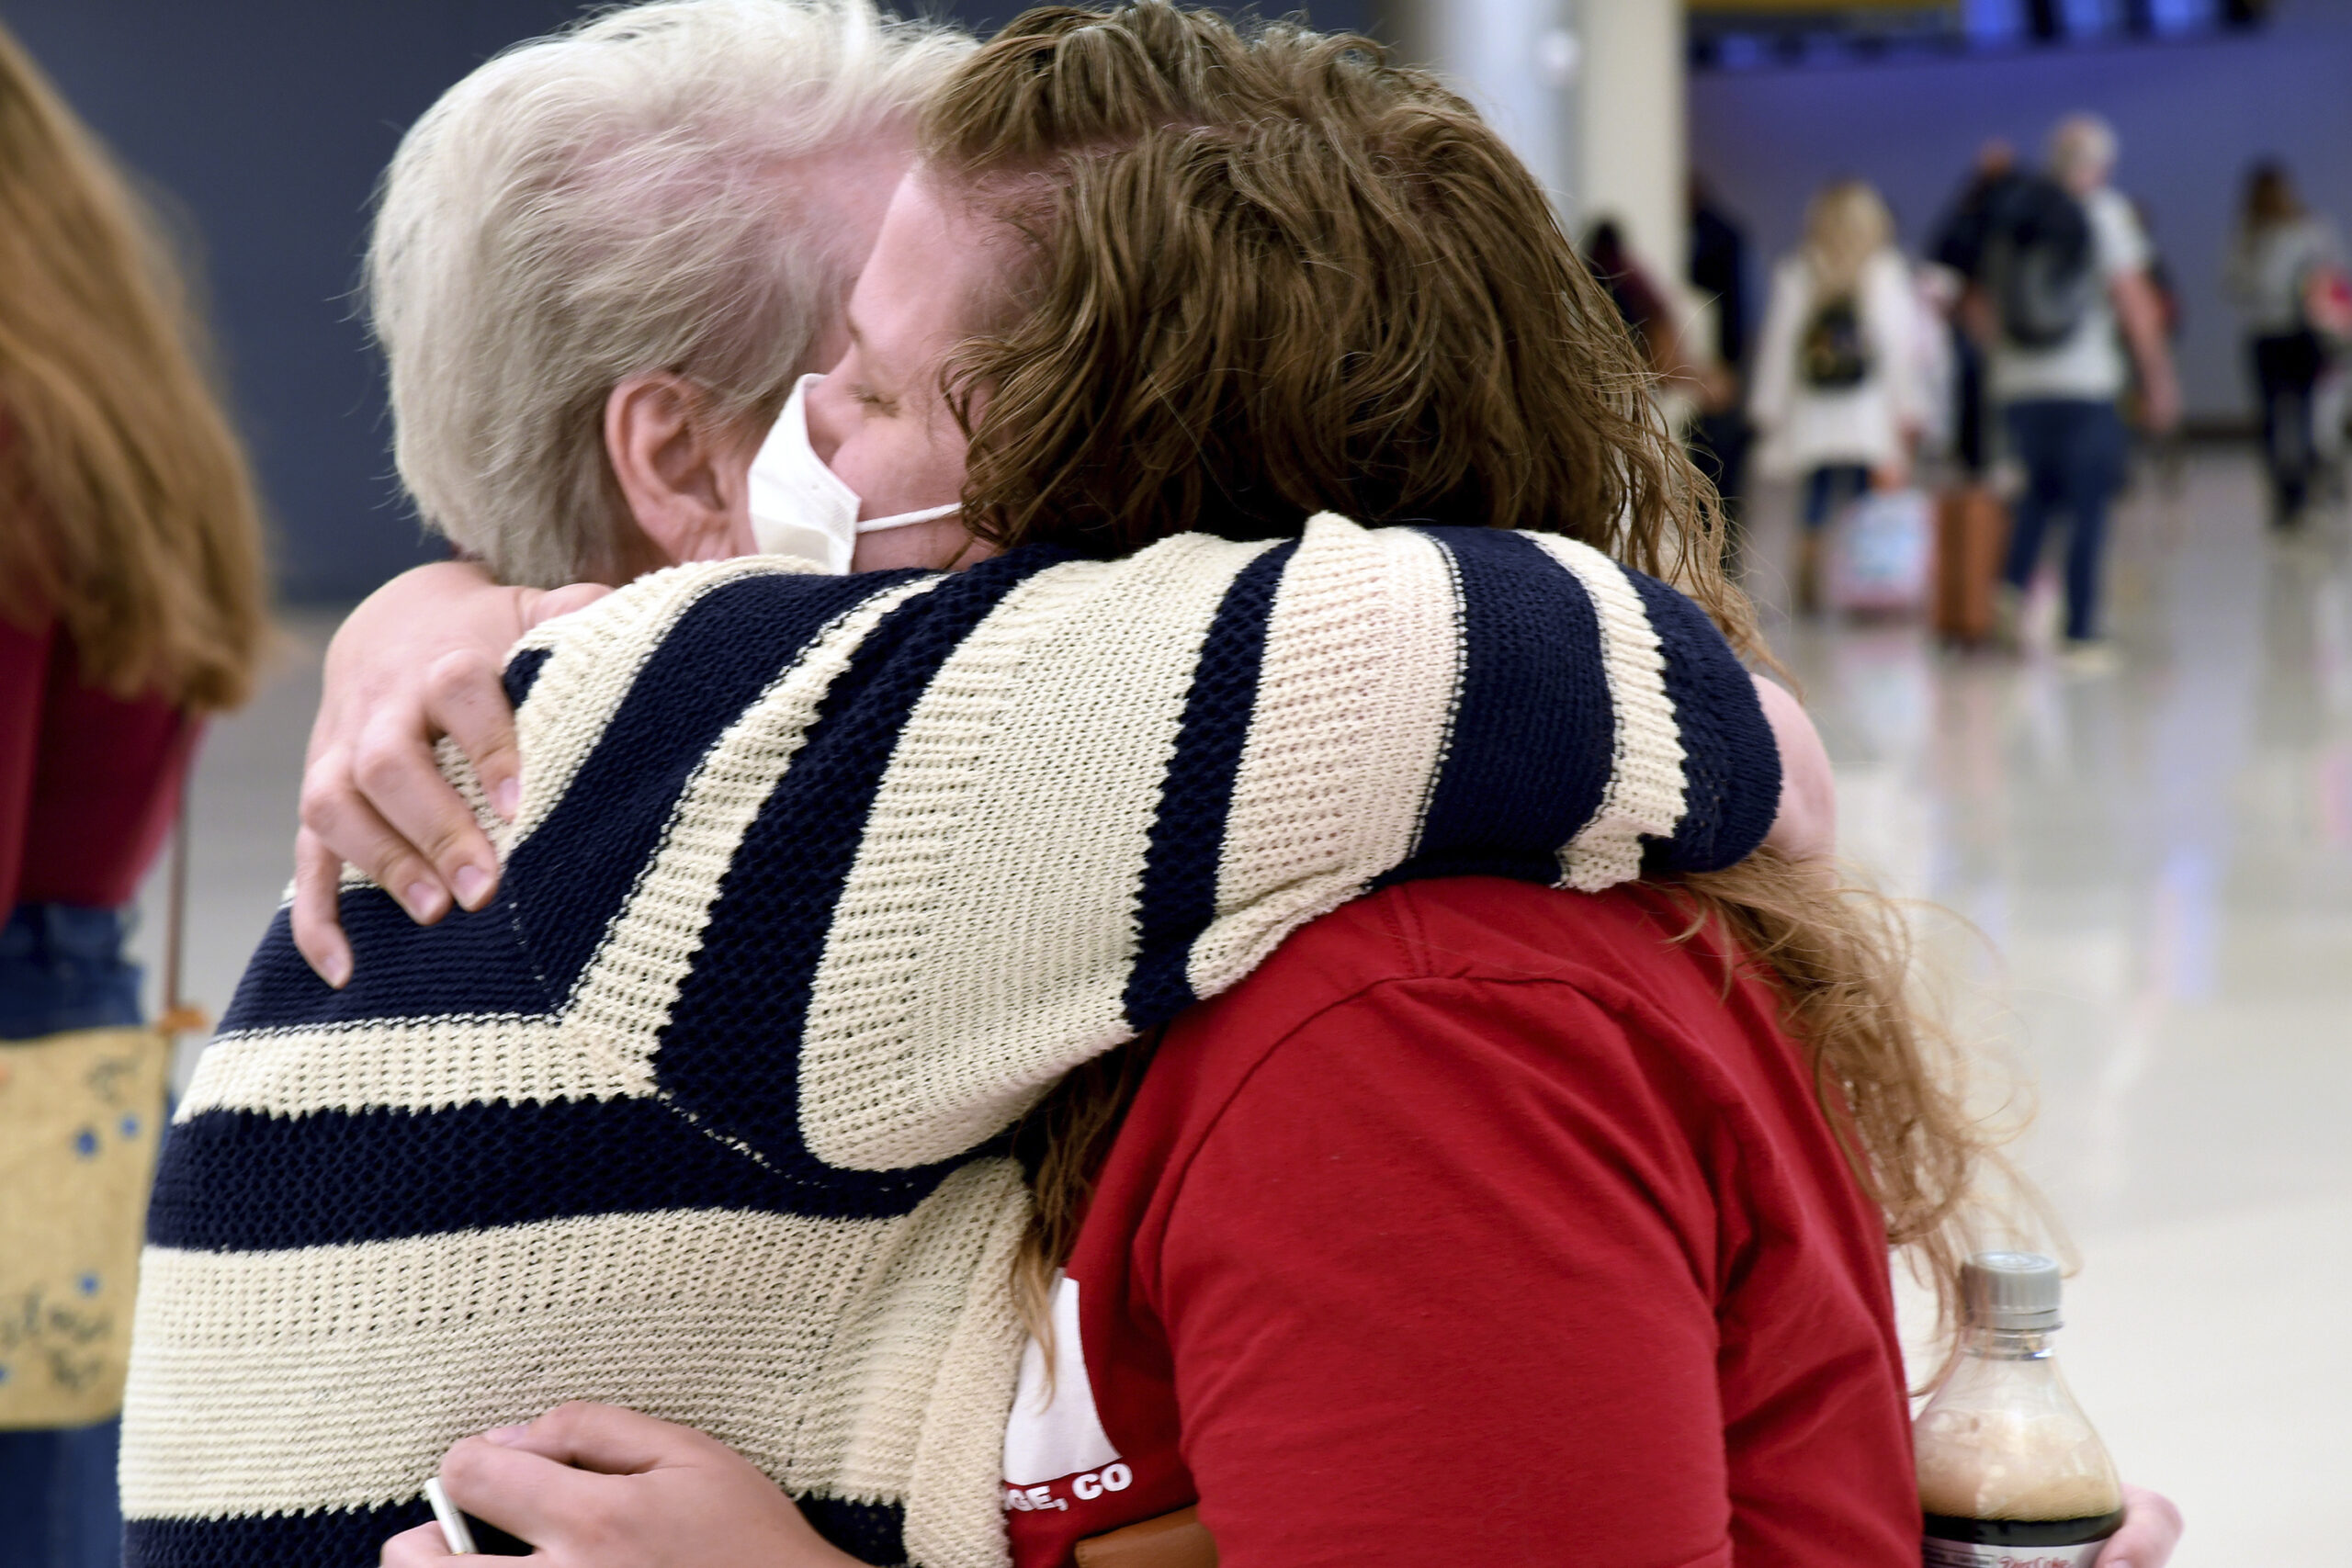 Jocelyn Ragusin hugs her mother, who arrived at Denver International Airport from Rapid City, South Dakota, on Tuesday, Nov. 23, 2021. Ragusin said about seven or eight family members would be gathering for the holiday and that the group had not discussed each other's vaccination status beforehand. Ragusin's husband contracted COVID-19 and spent four days in the intensive care unit in October 2020, but the family is willing to accept a certain level of risk to have a sense of community back. (AP Photo/Thomas Peipert)